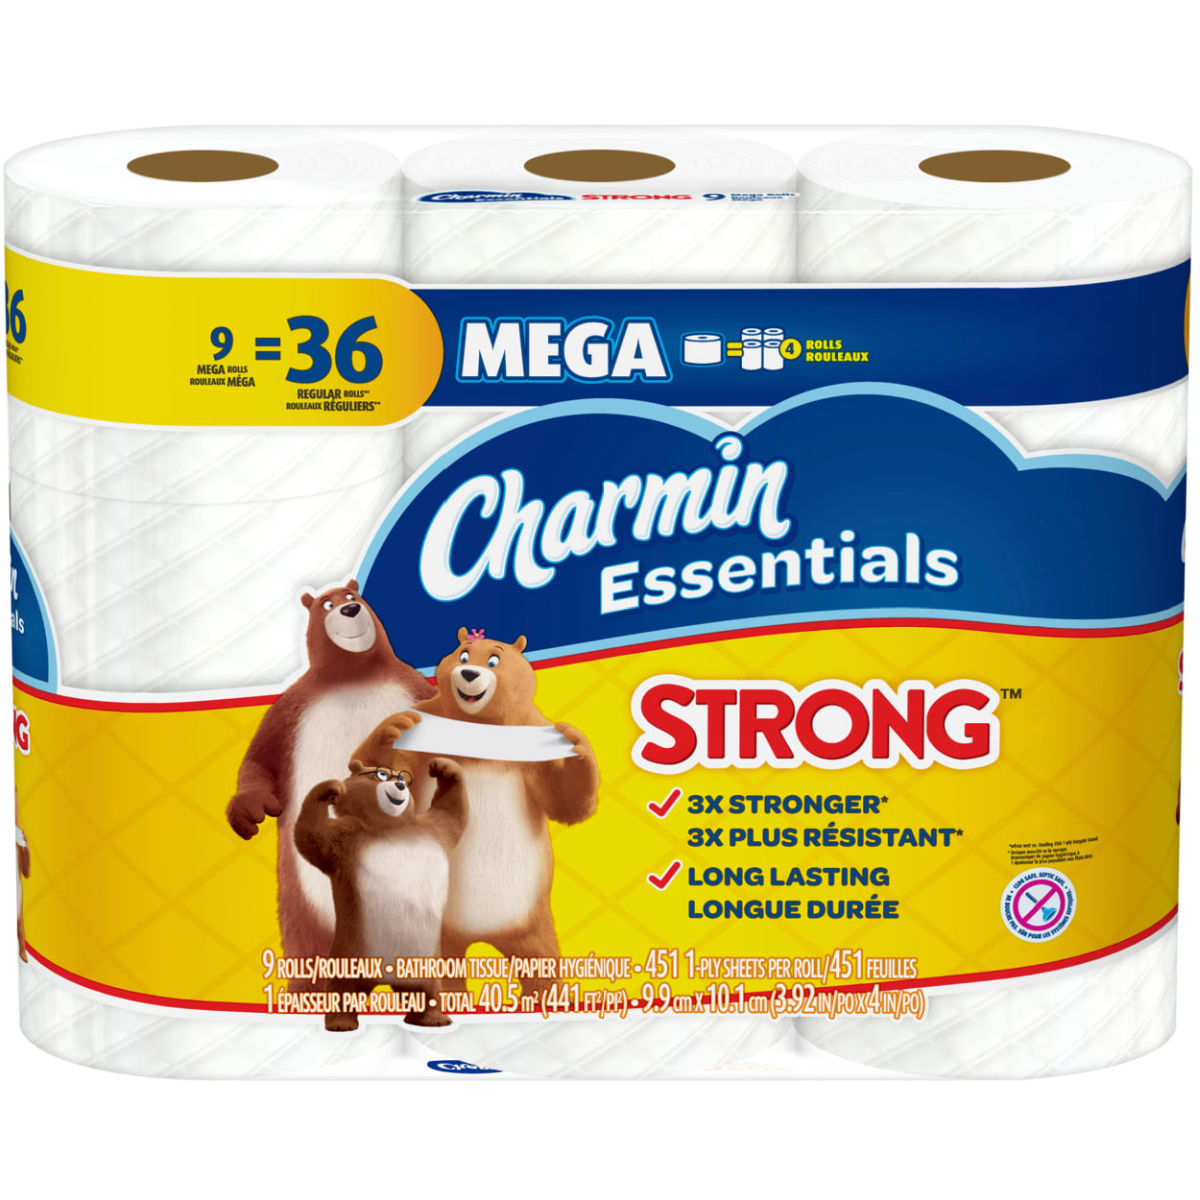 Charmin Essentials Strong 1-Ply Mega Roll Toilet Paper 9-Pack